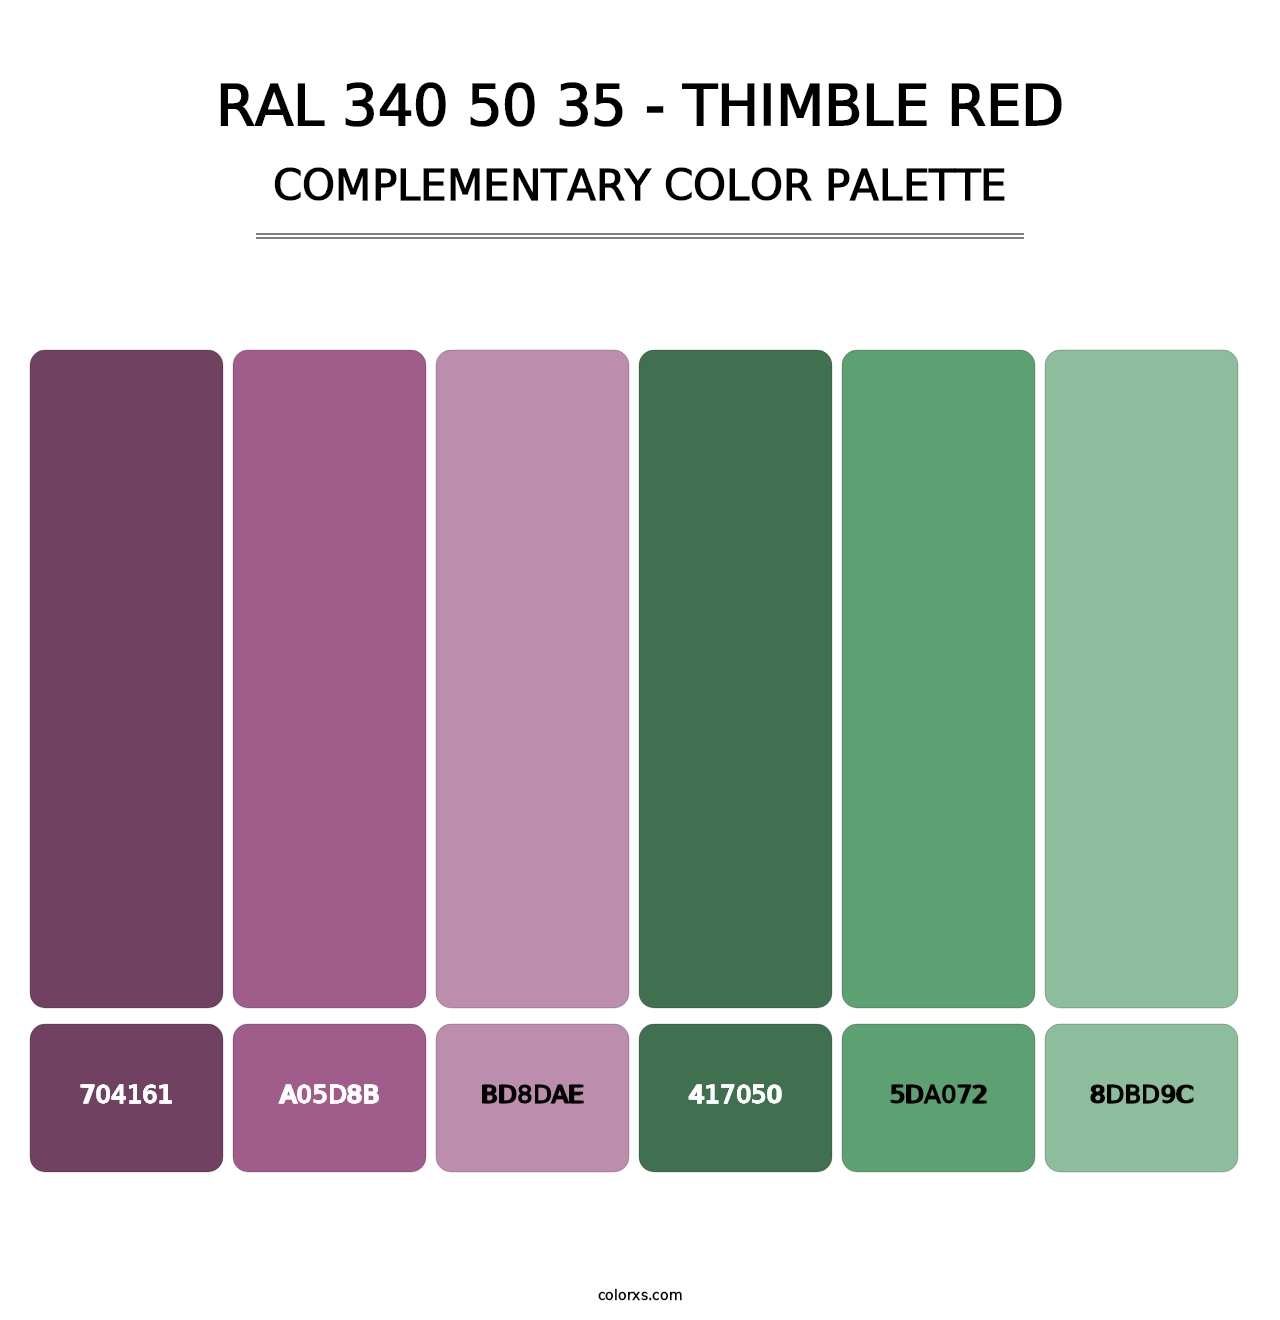 RAL 340 50 35 - Thimble Red - Complementary Color Palette